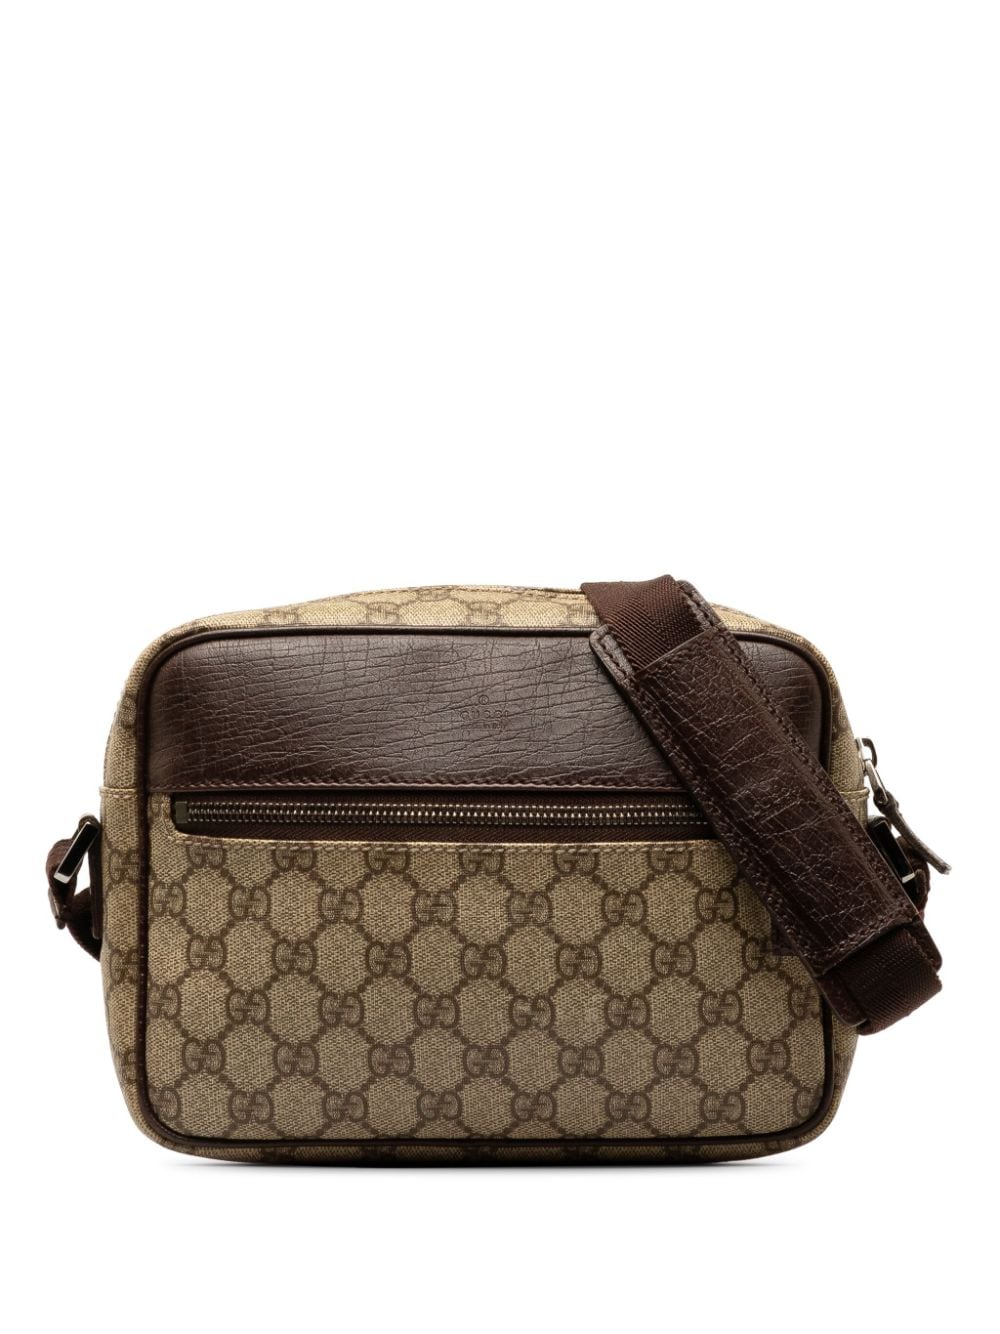 Pre-owned Gucci 2000-2015 Gg Supreme Crossbody Bag In Brown